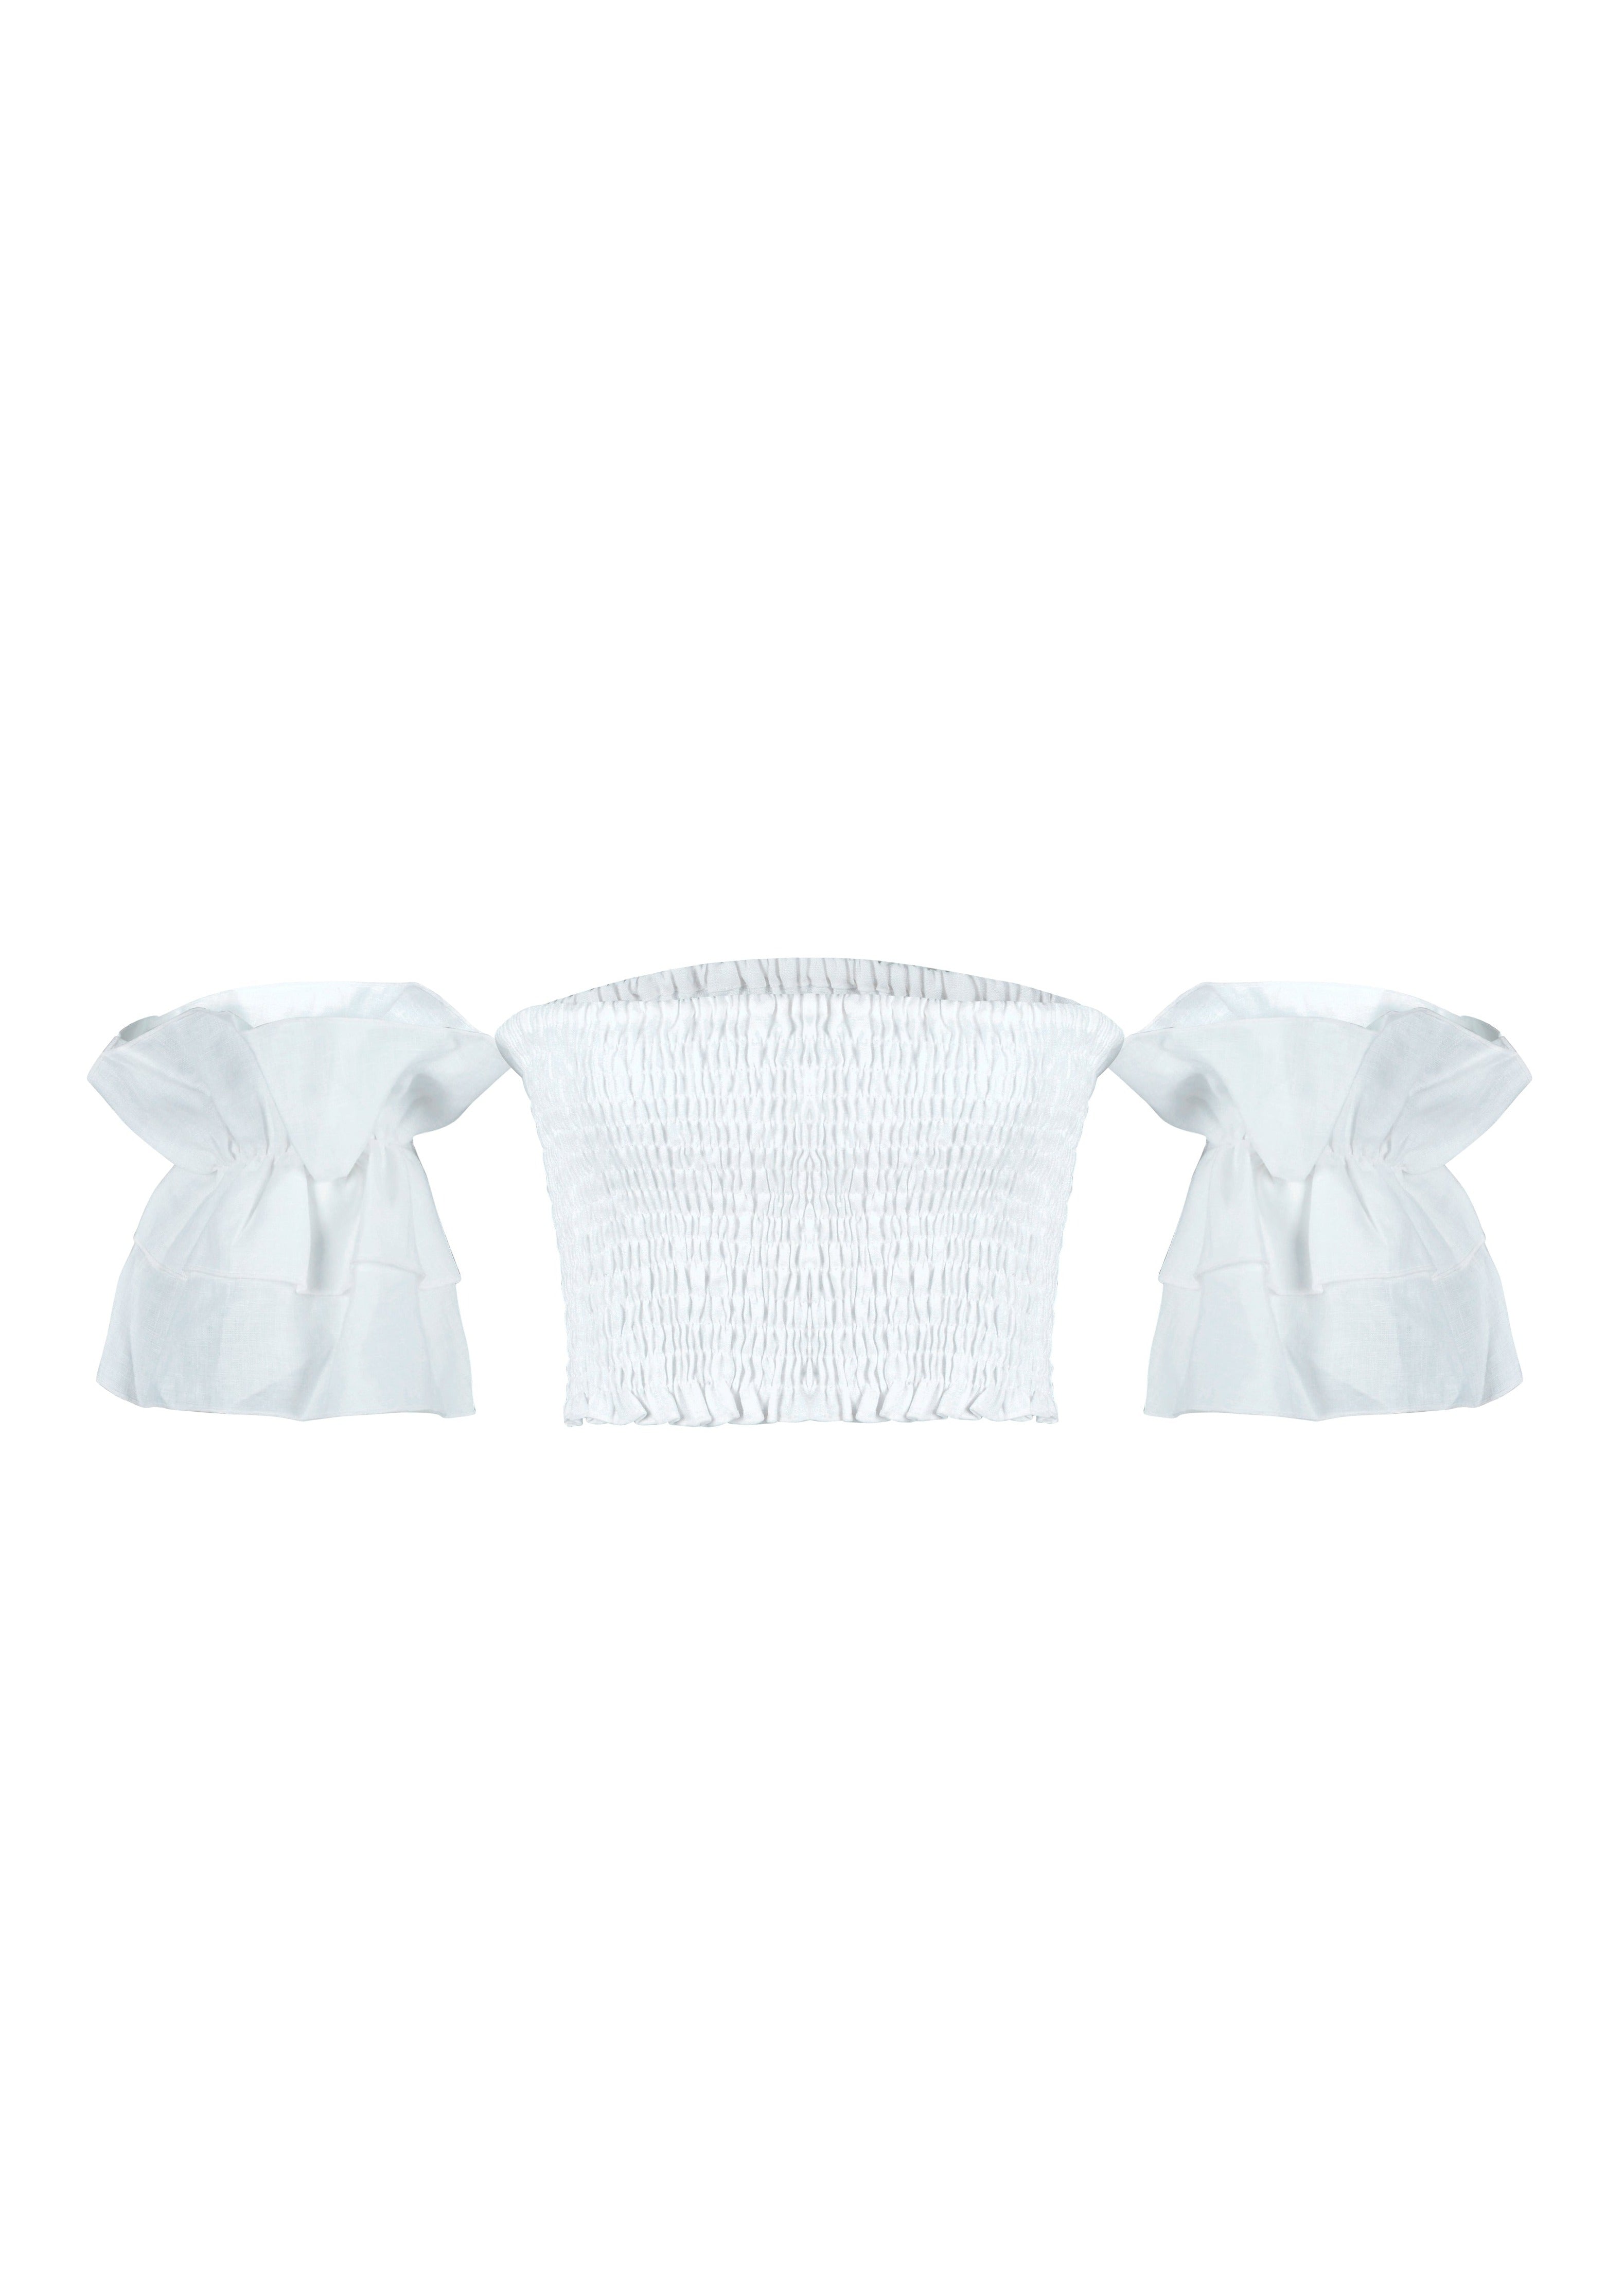 BLOOMS CROP TOP | WHITE by Puka the Label